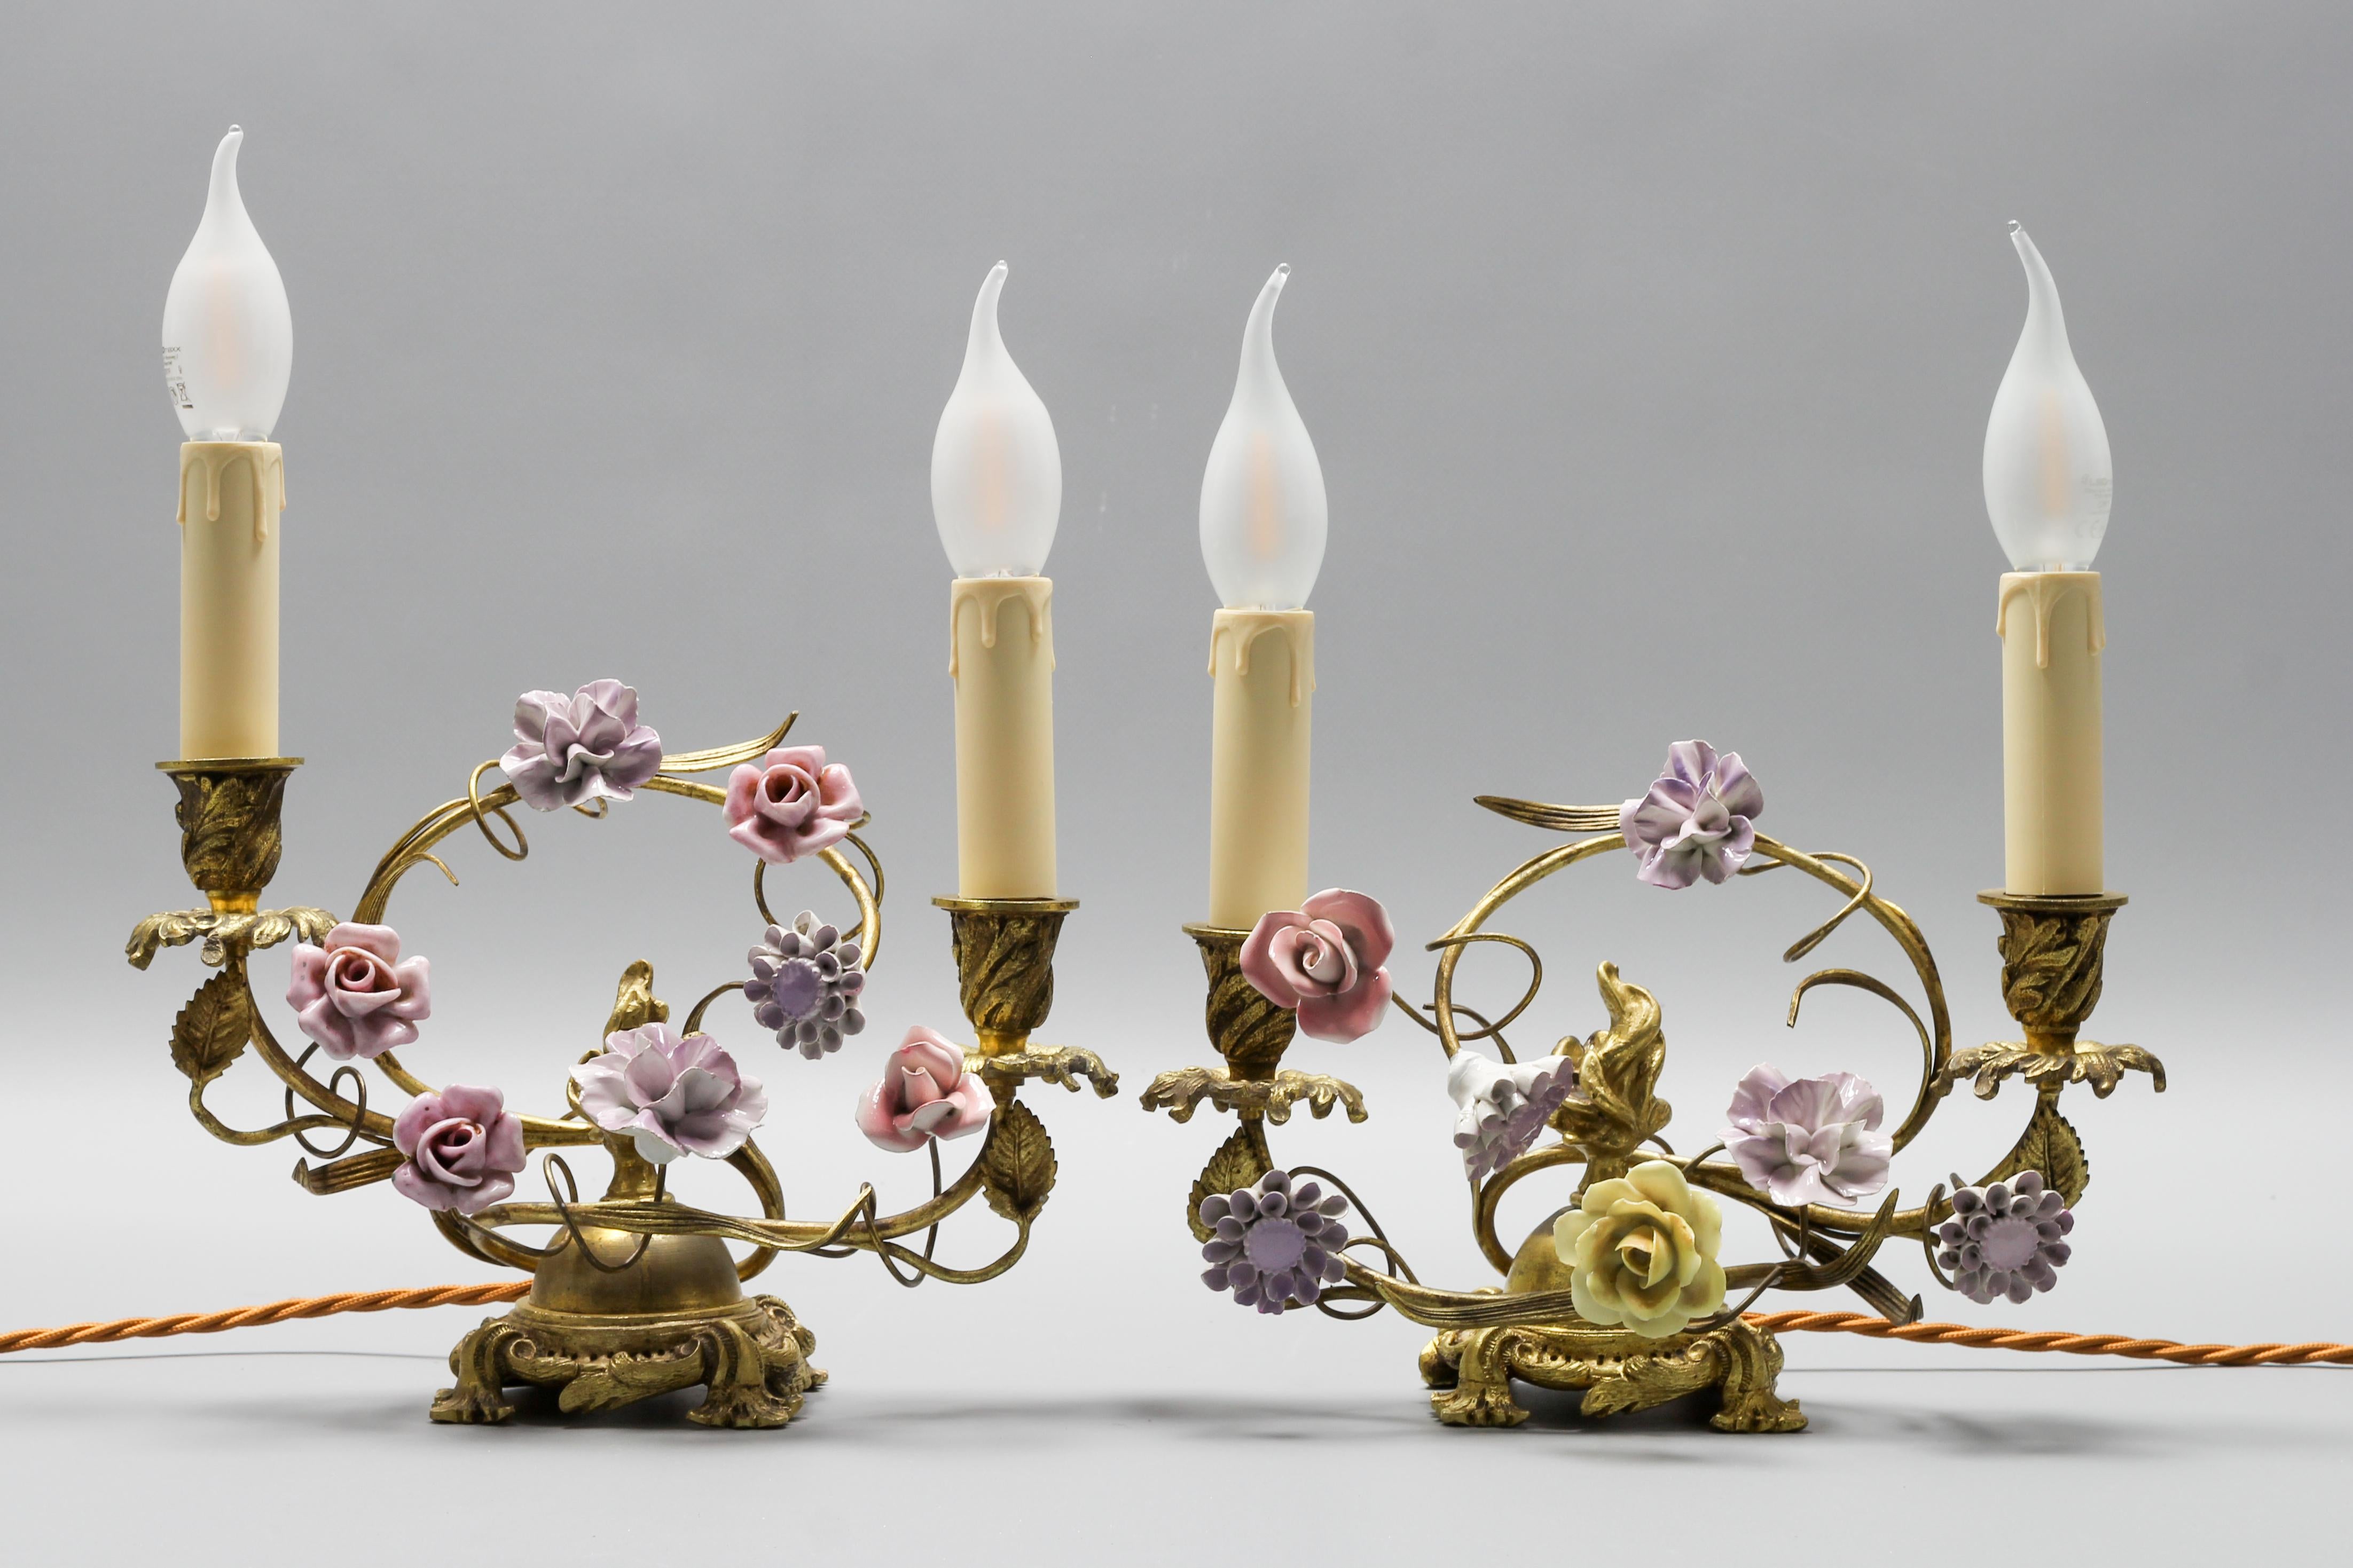 Pair of French Rococo style gilt bronze and porcelain flower table lamps.
This absolutely adorable pair of French Rococo-style two-light table lamps are made of gilt bronze and are surrounded by foliate decors and have an ornate round foliate bronze